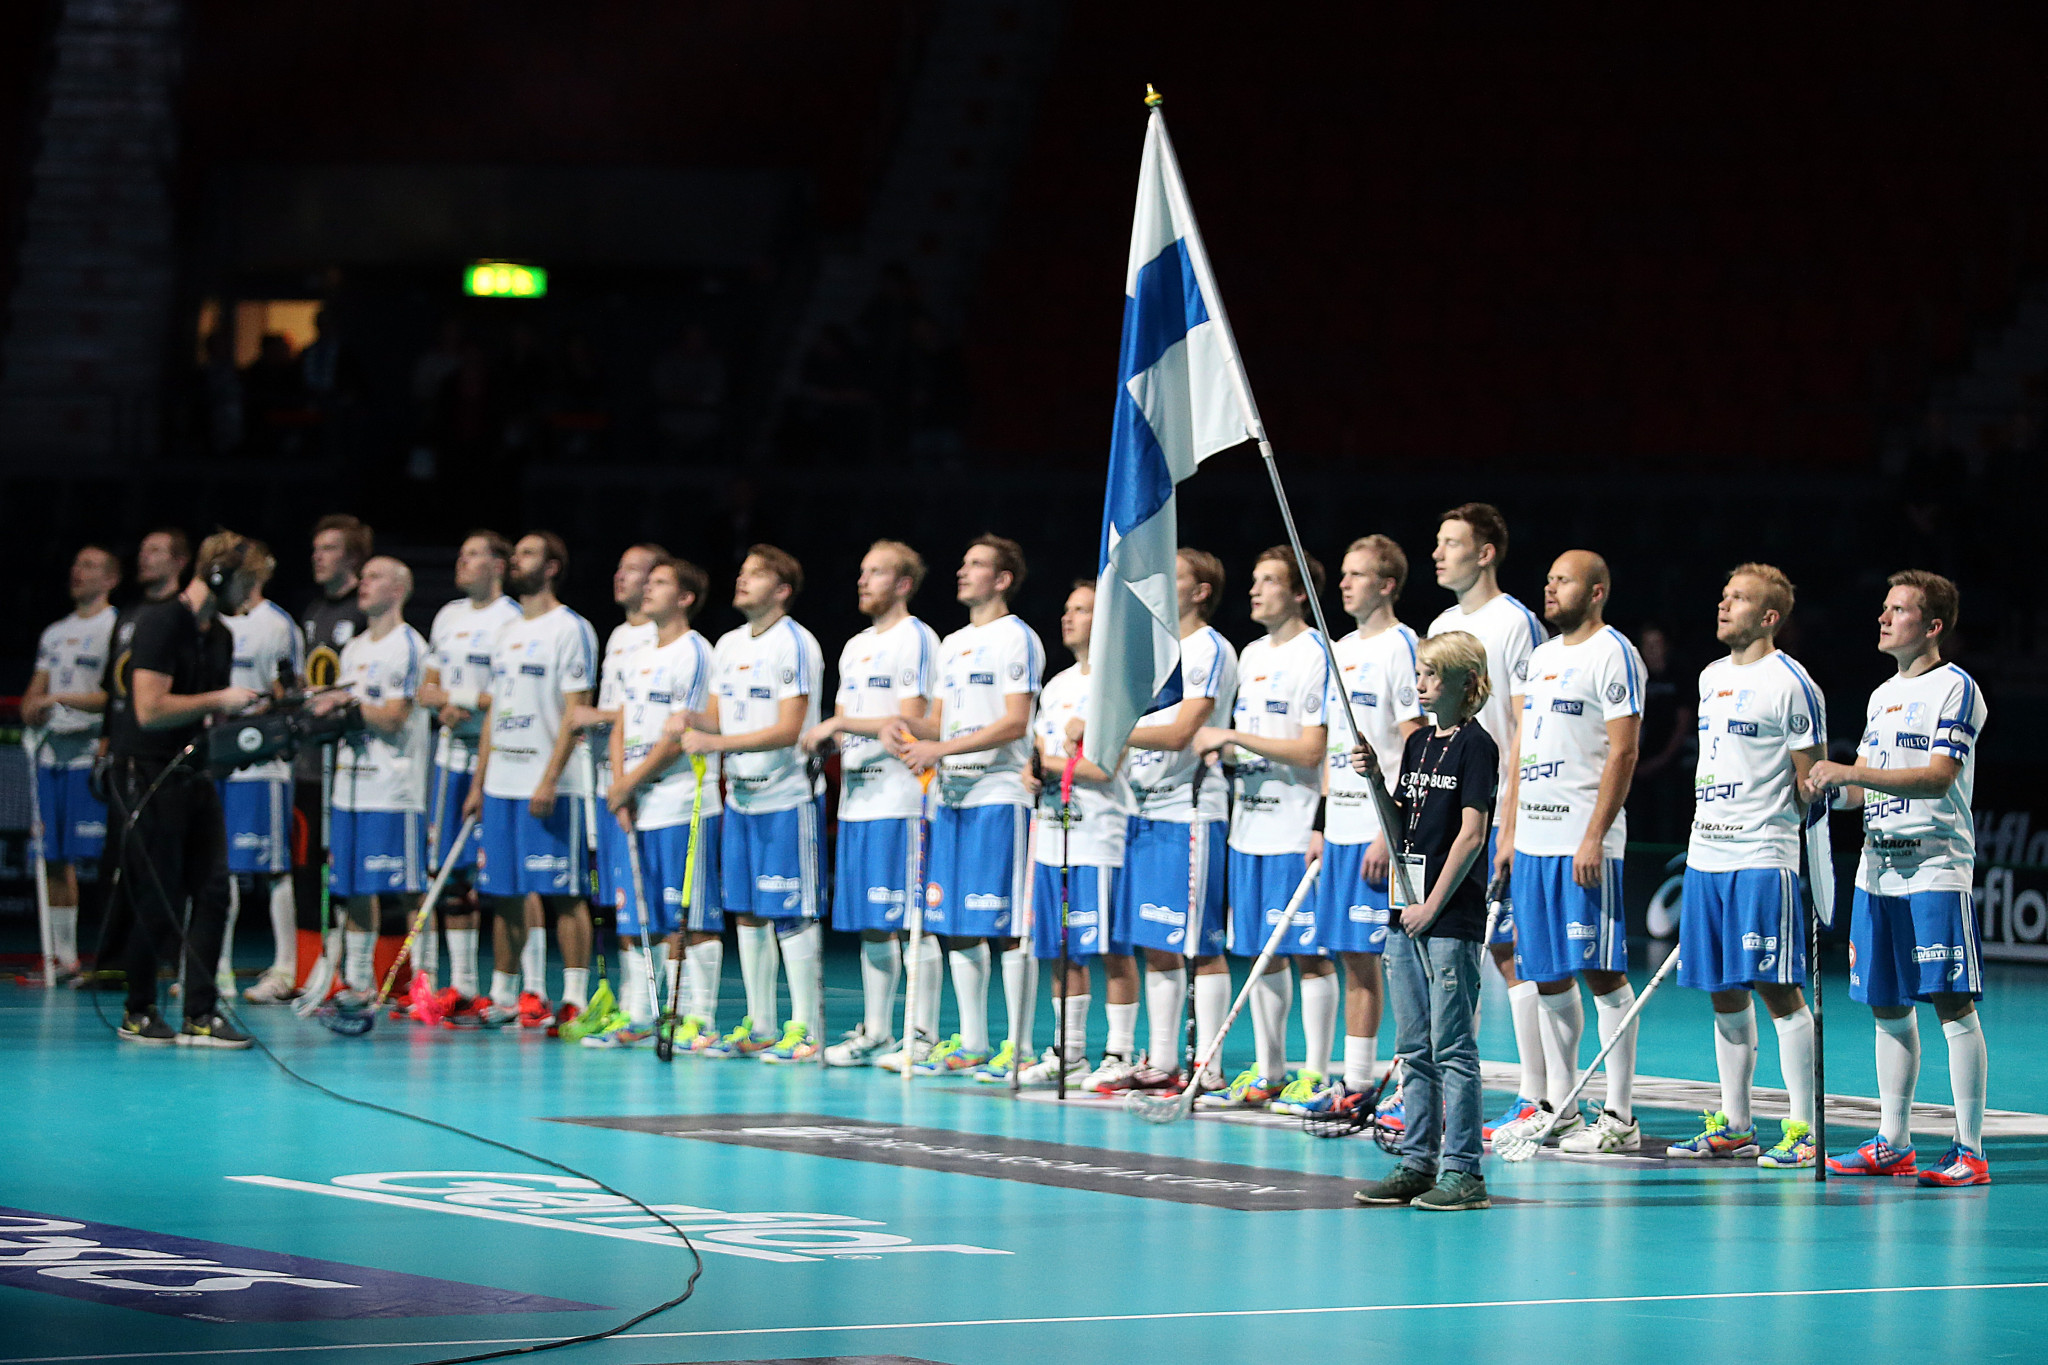 Finland are aiming for the third straight World Floorball Championship crown ©IFF